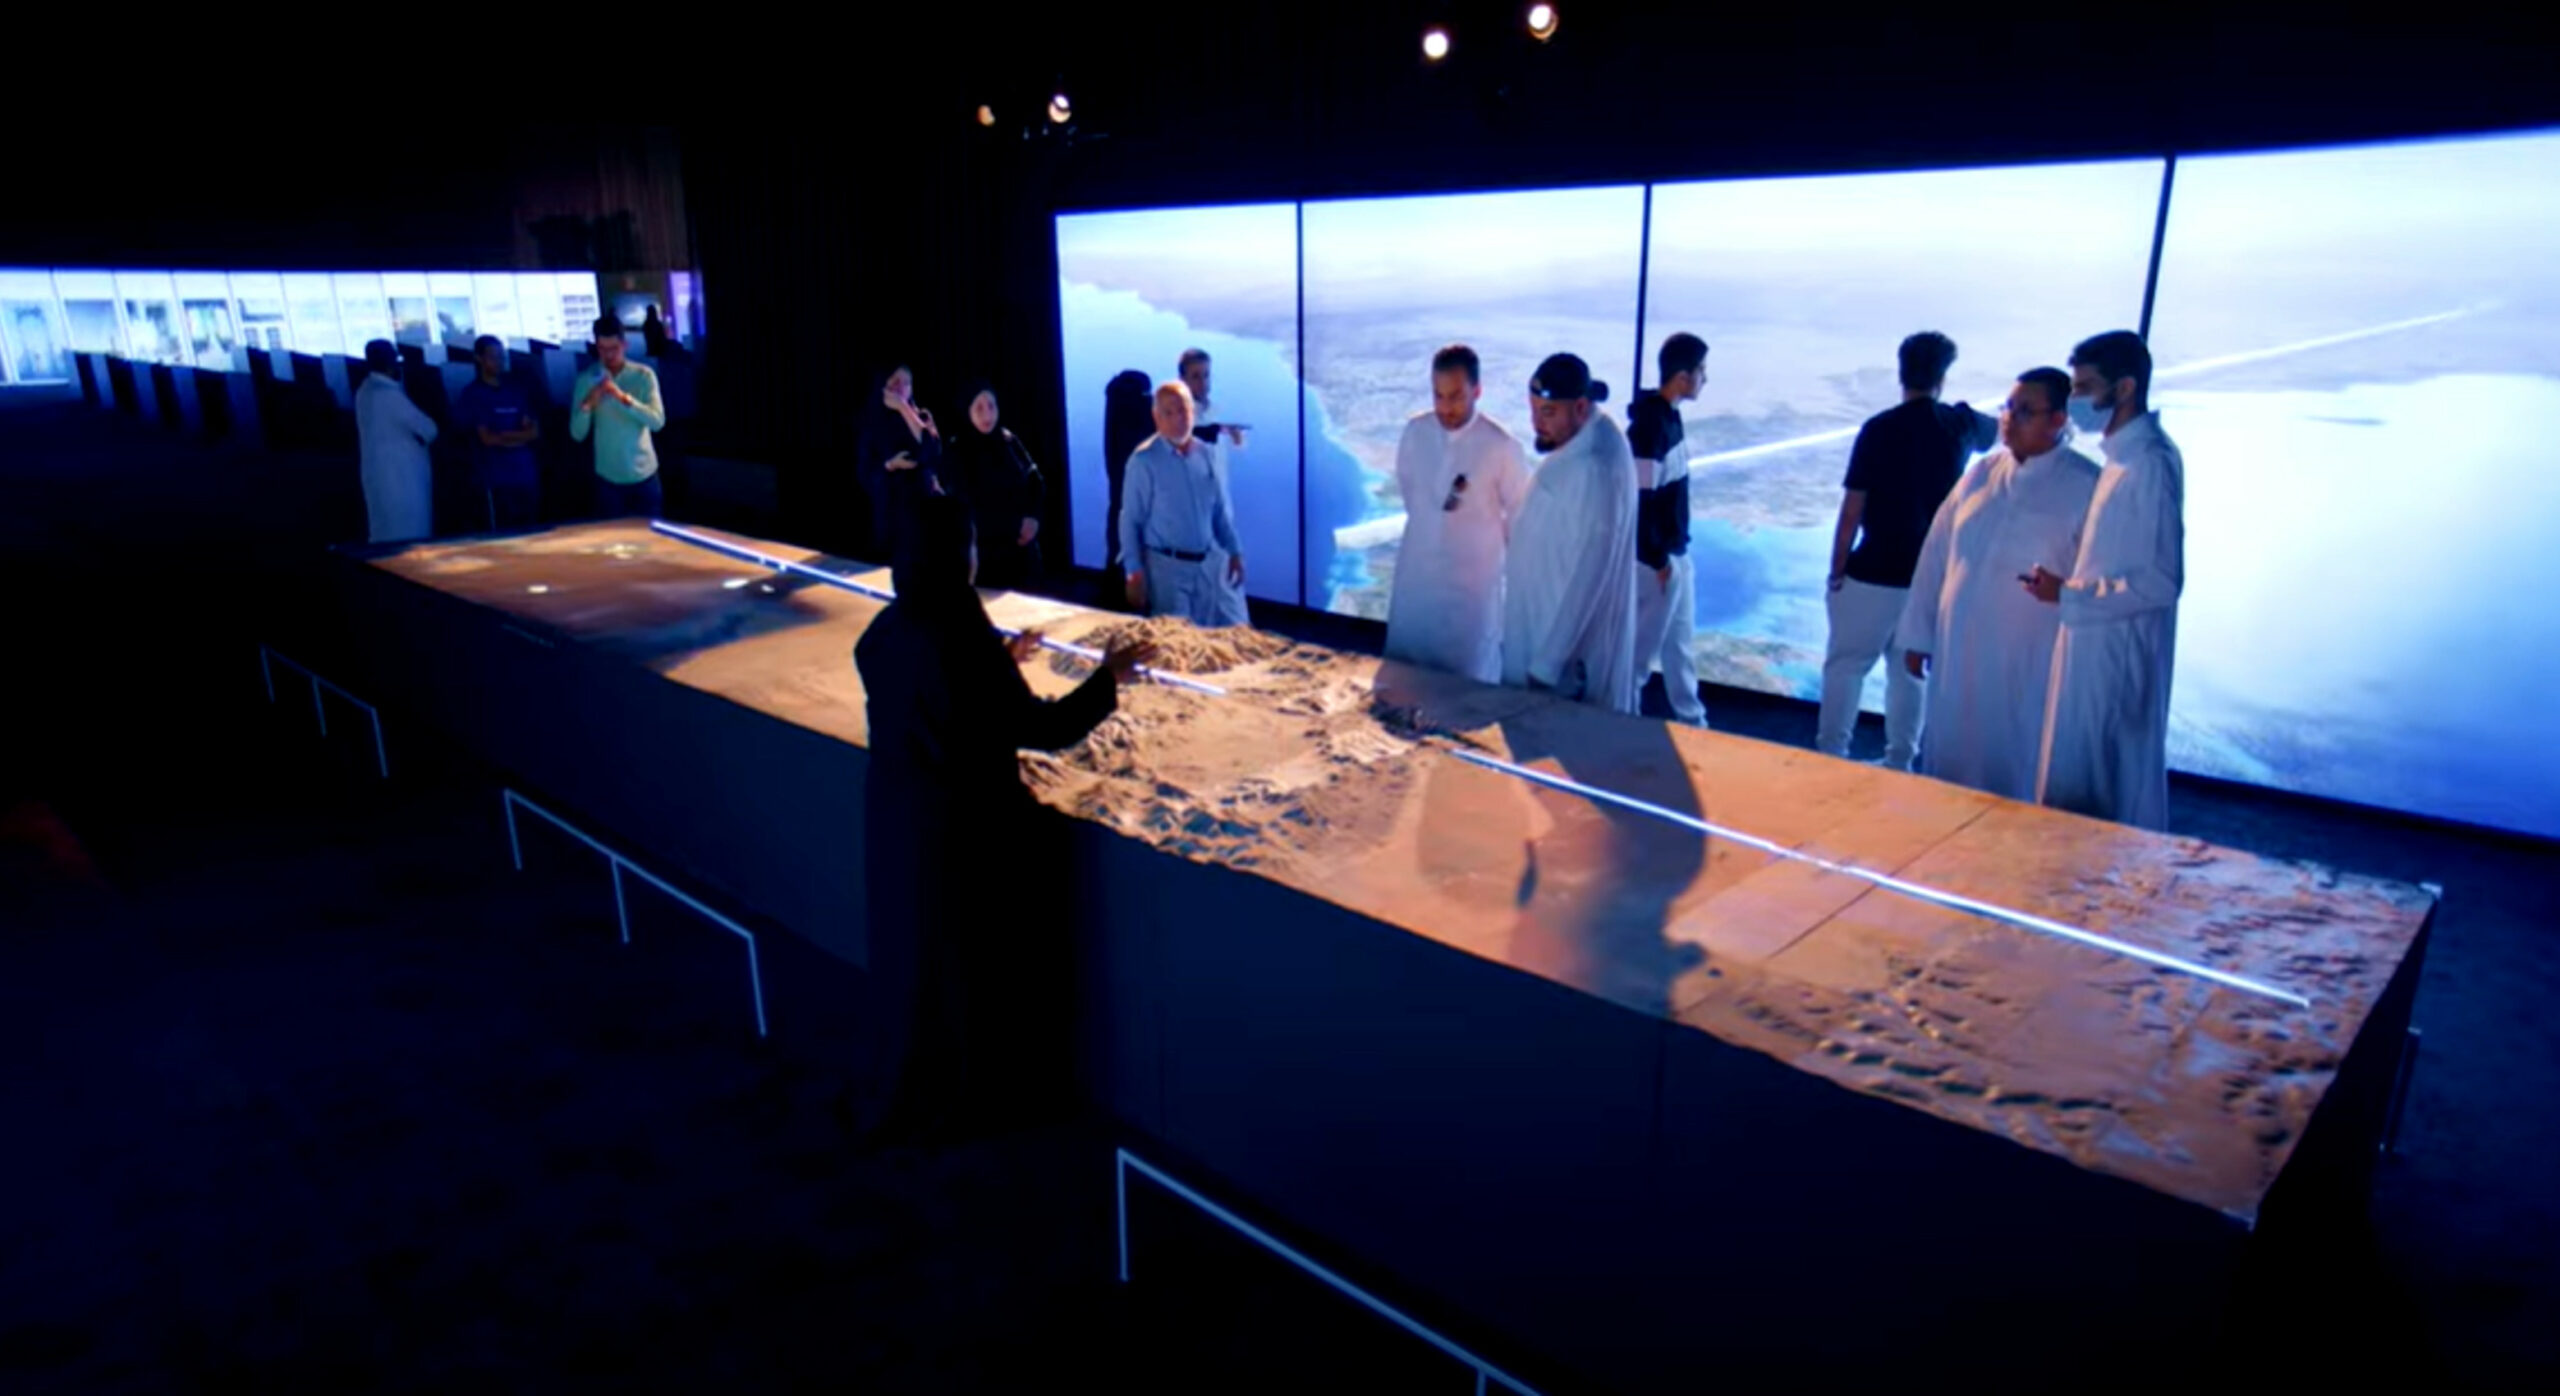 Some 200,000 people are expected to attend The Line Experience Exhibition in Riyadh.